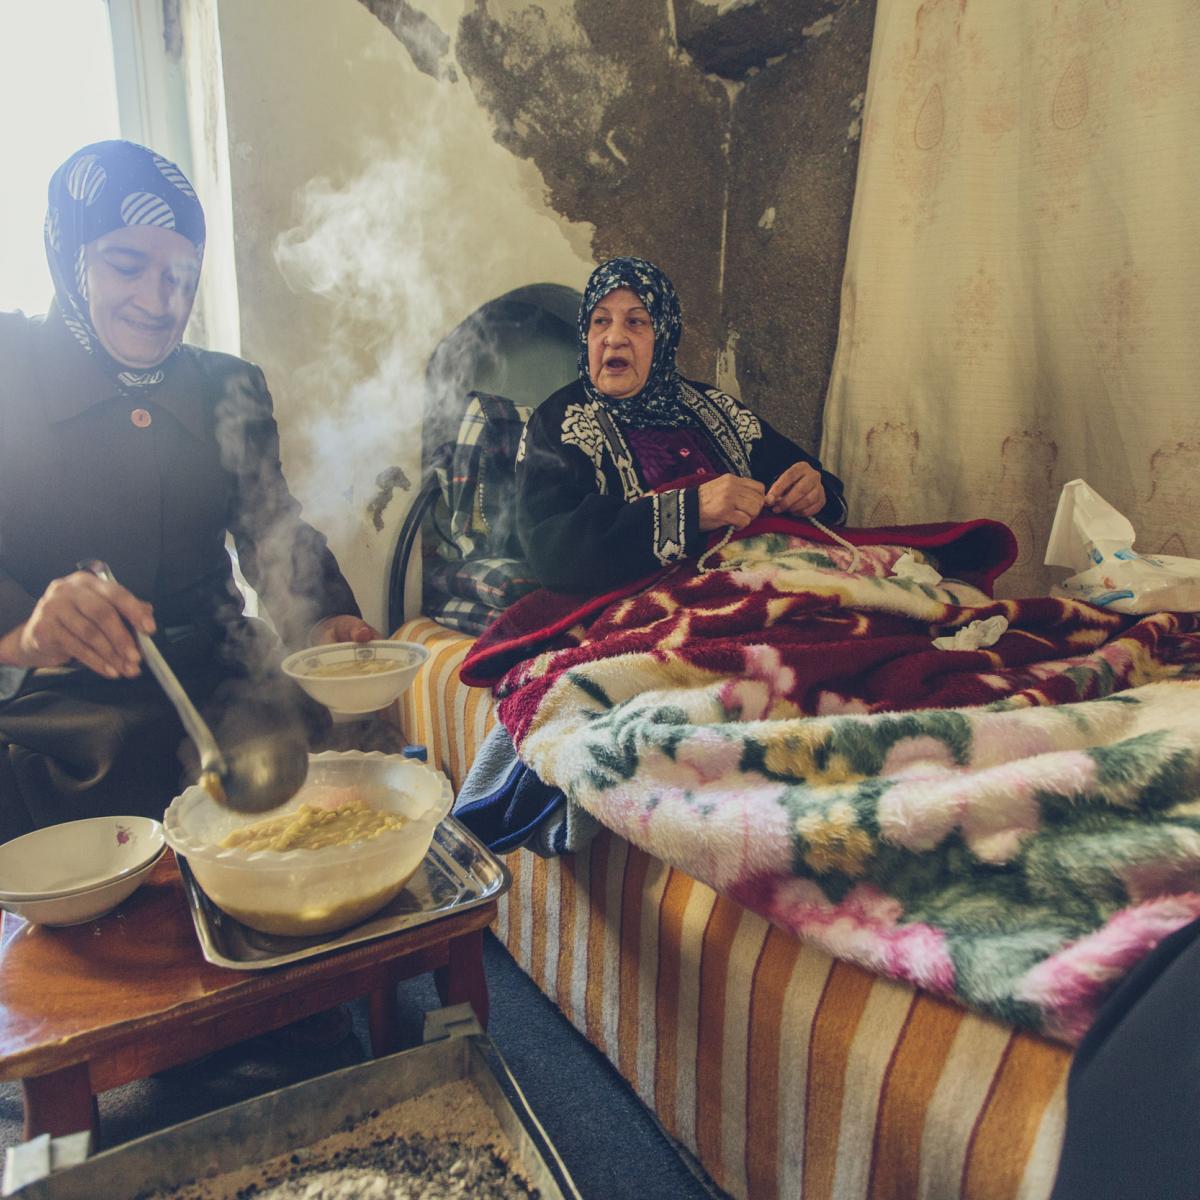 Women sharing a meal in a bedroom.